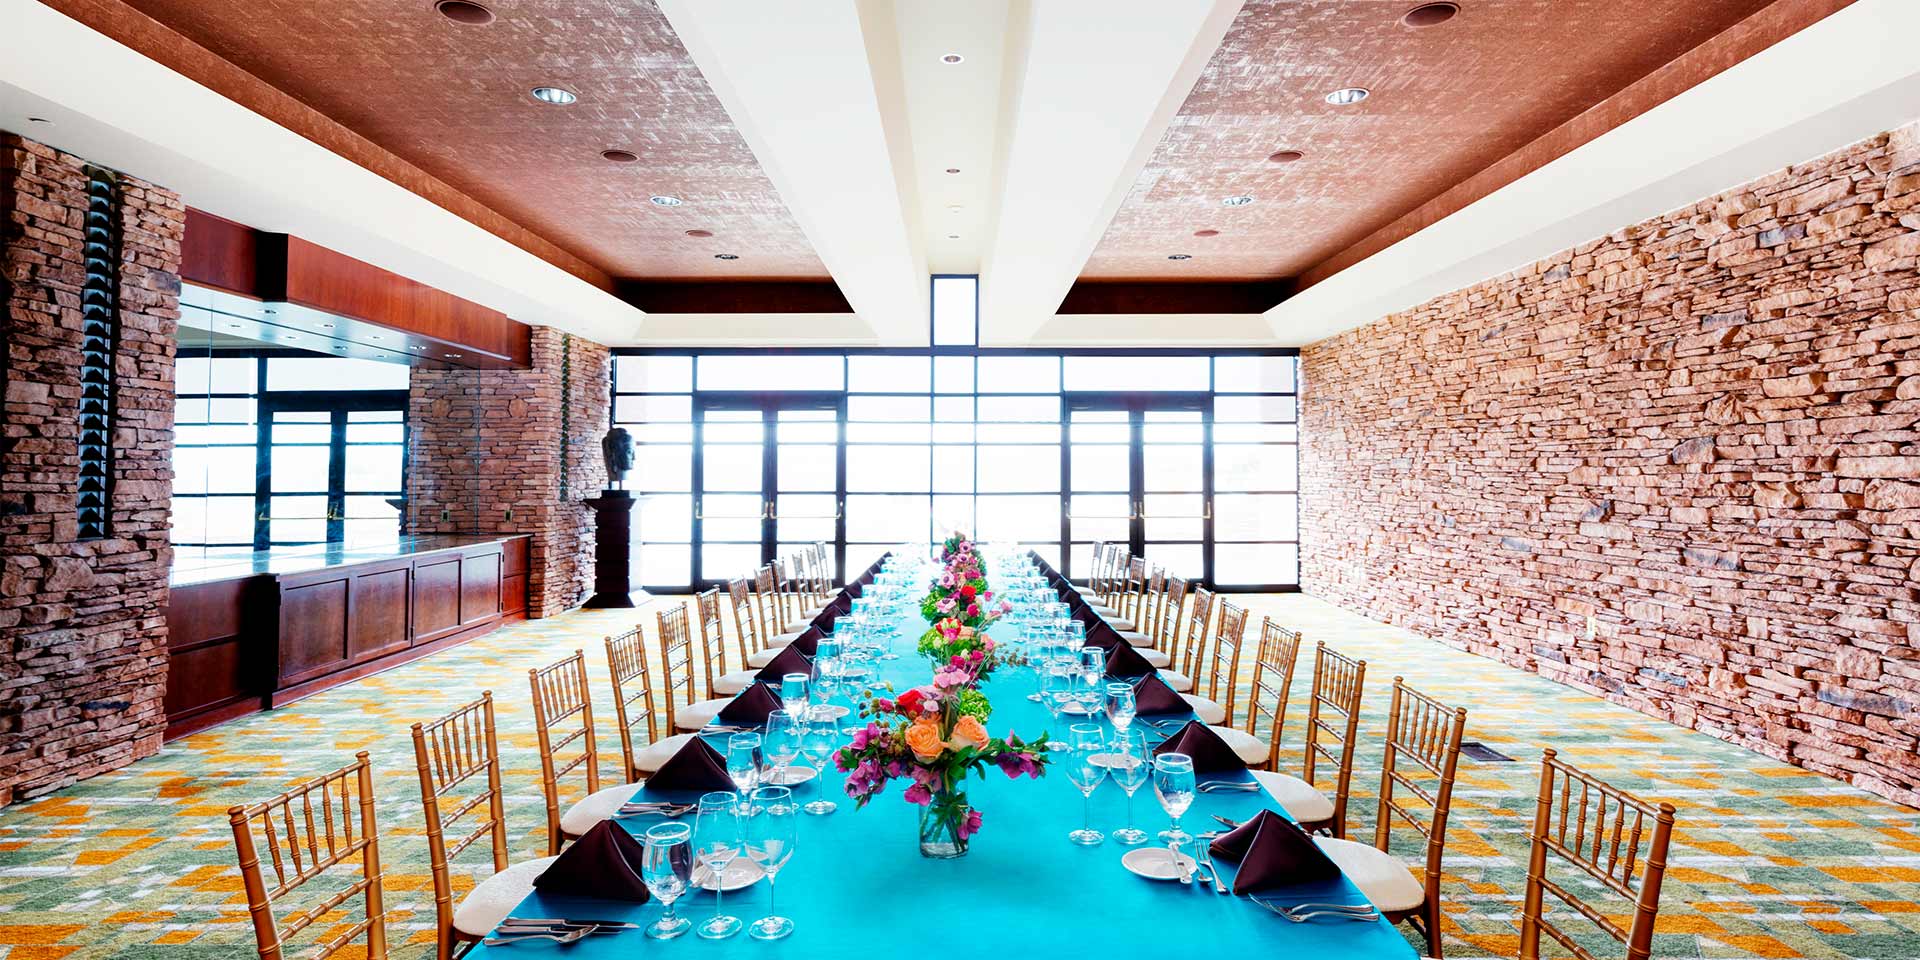 large dining table with blue table cloth and large windows